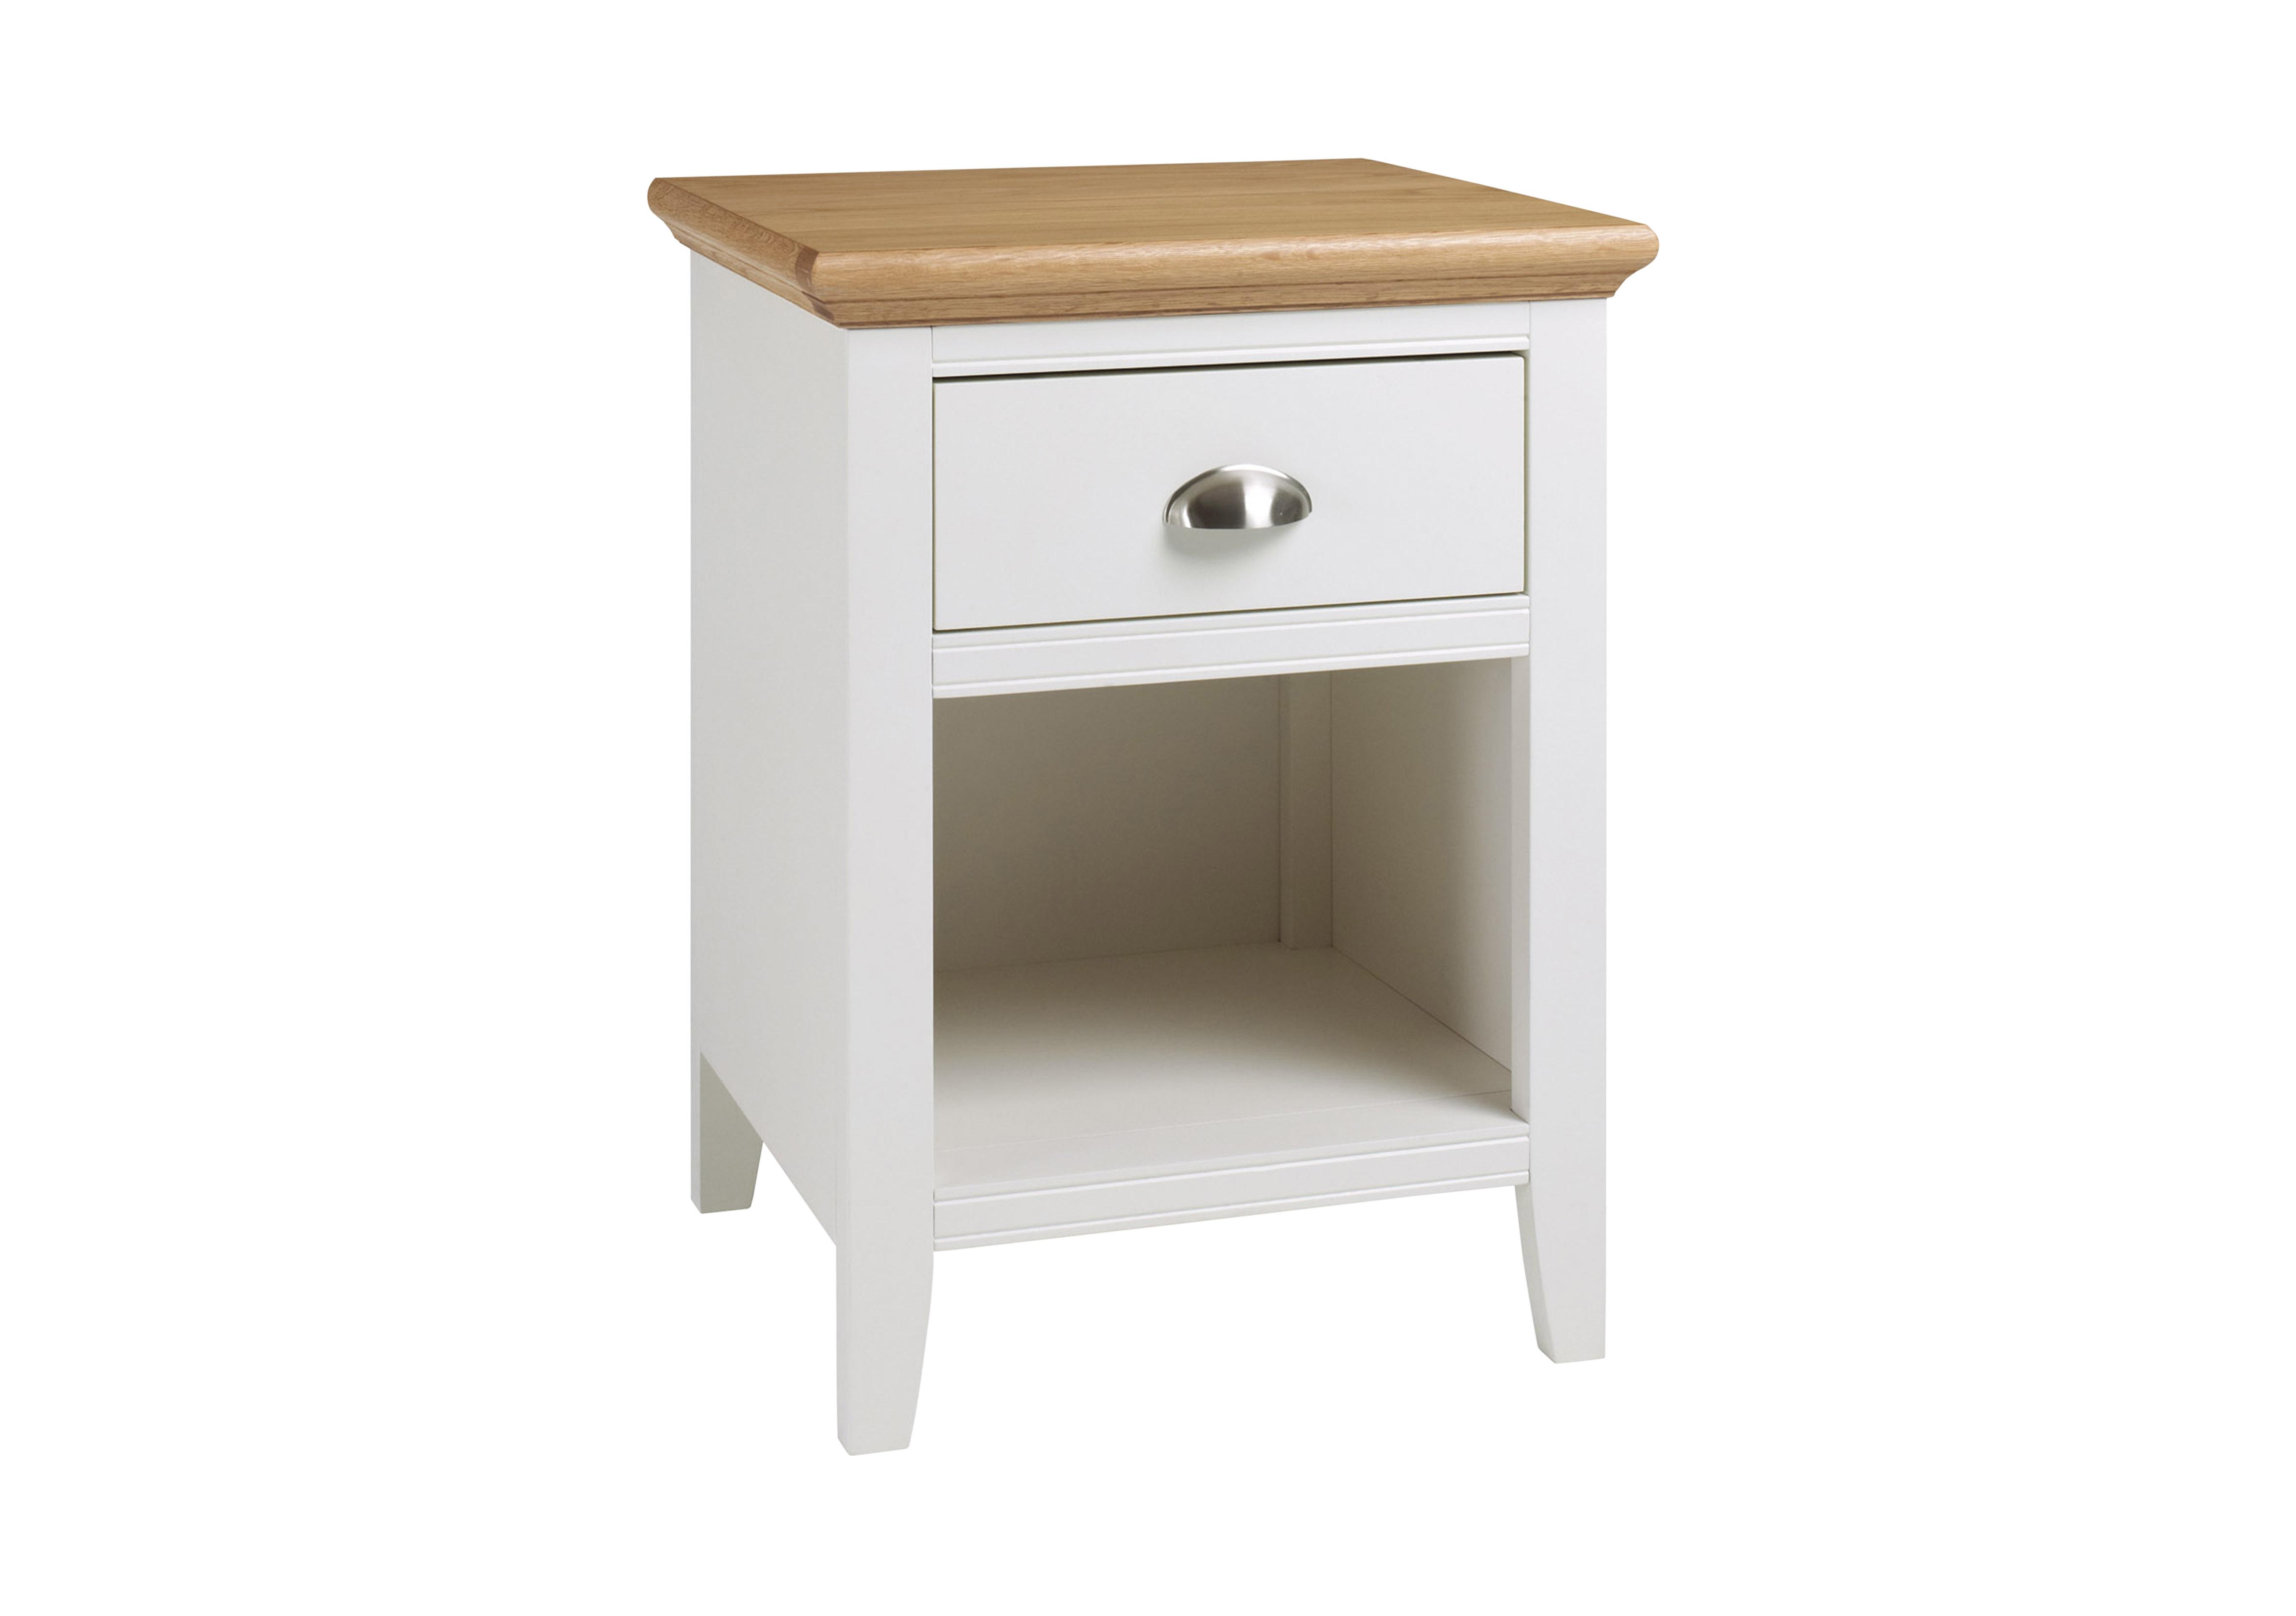 Emily 1 Drawer Nightstand in Ivory And Oak on Furniture Village